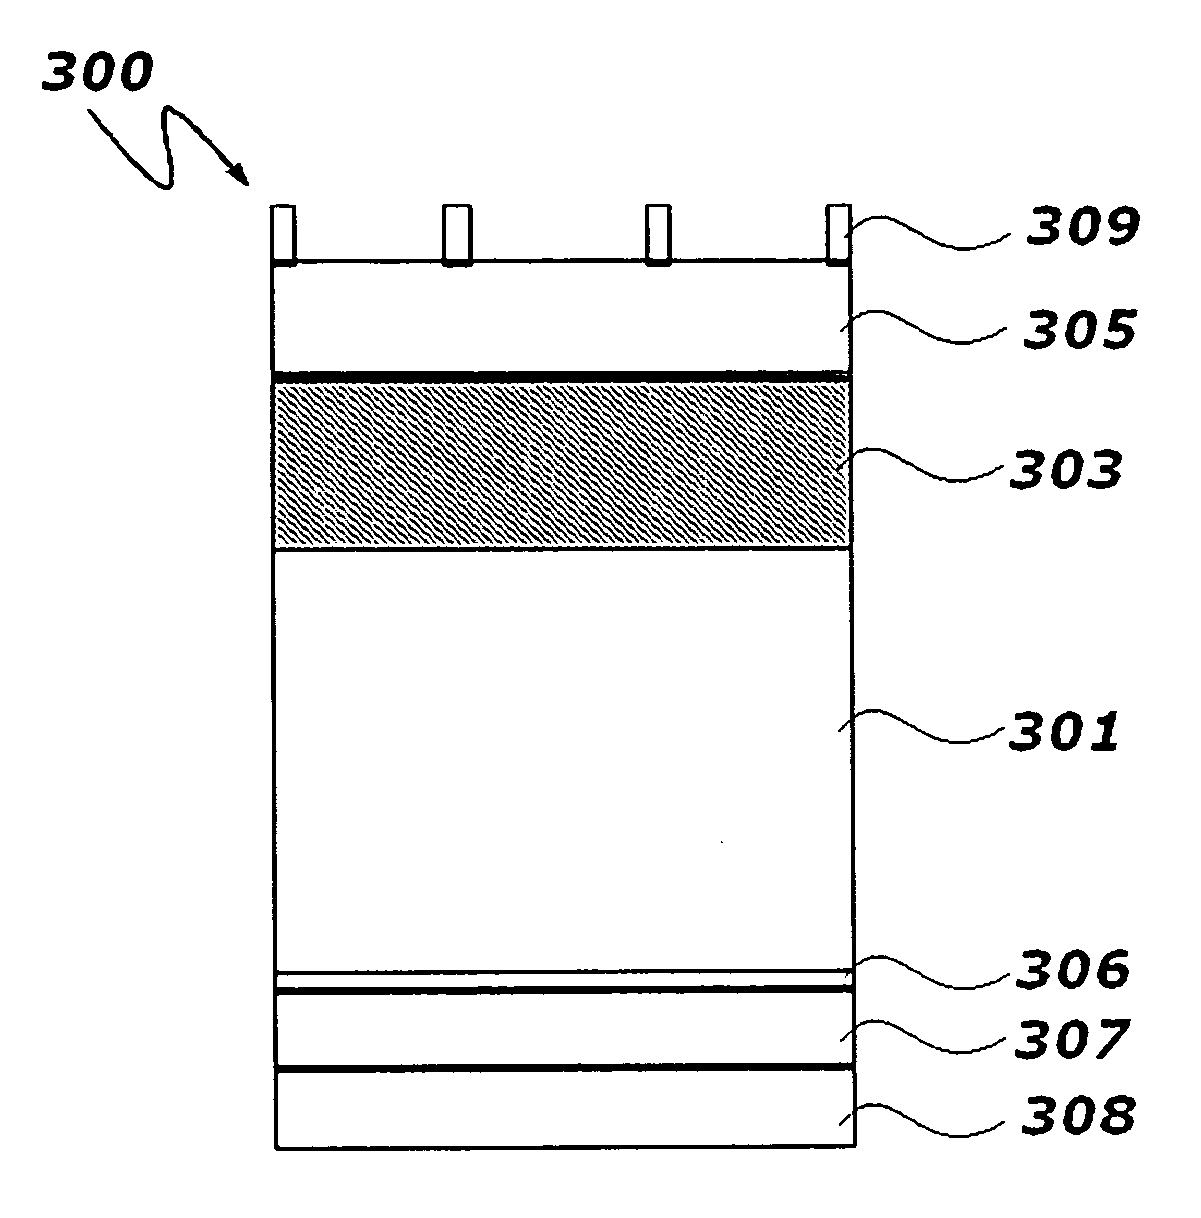 Hetero-junction silicon solar cell and fabrication method thereof